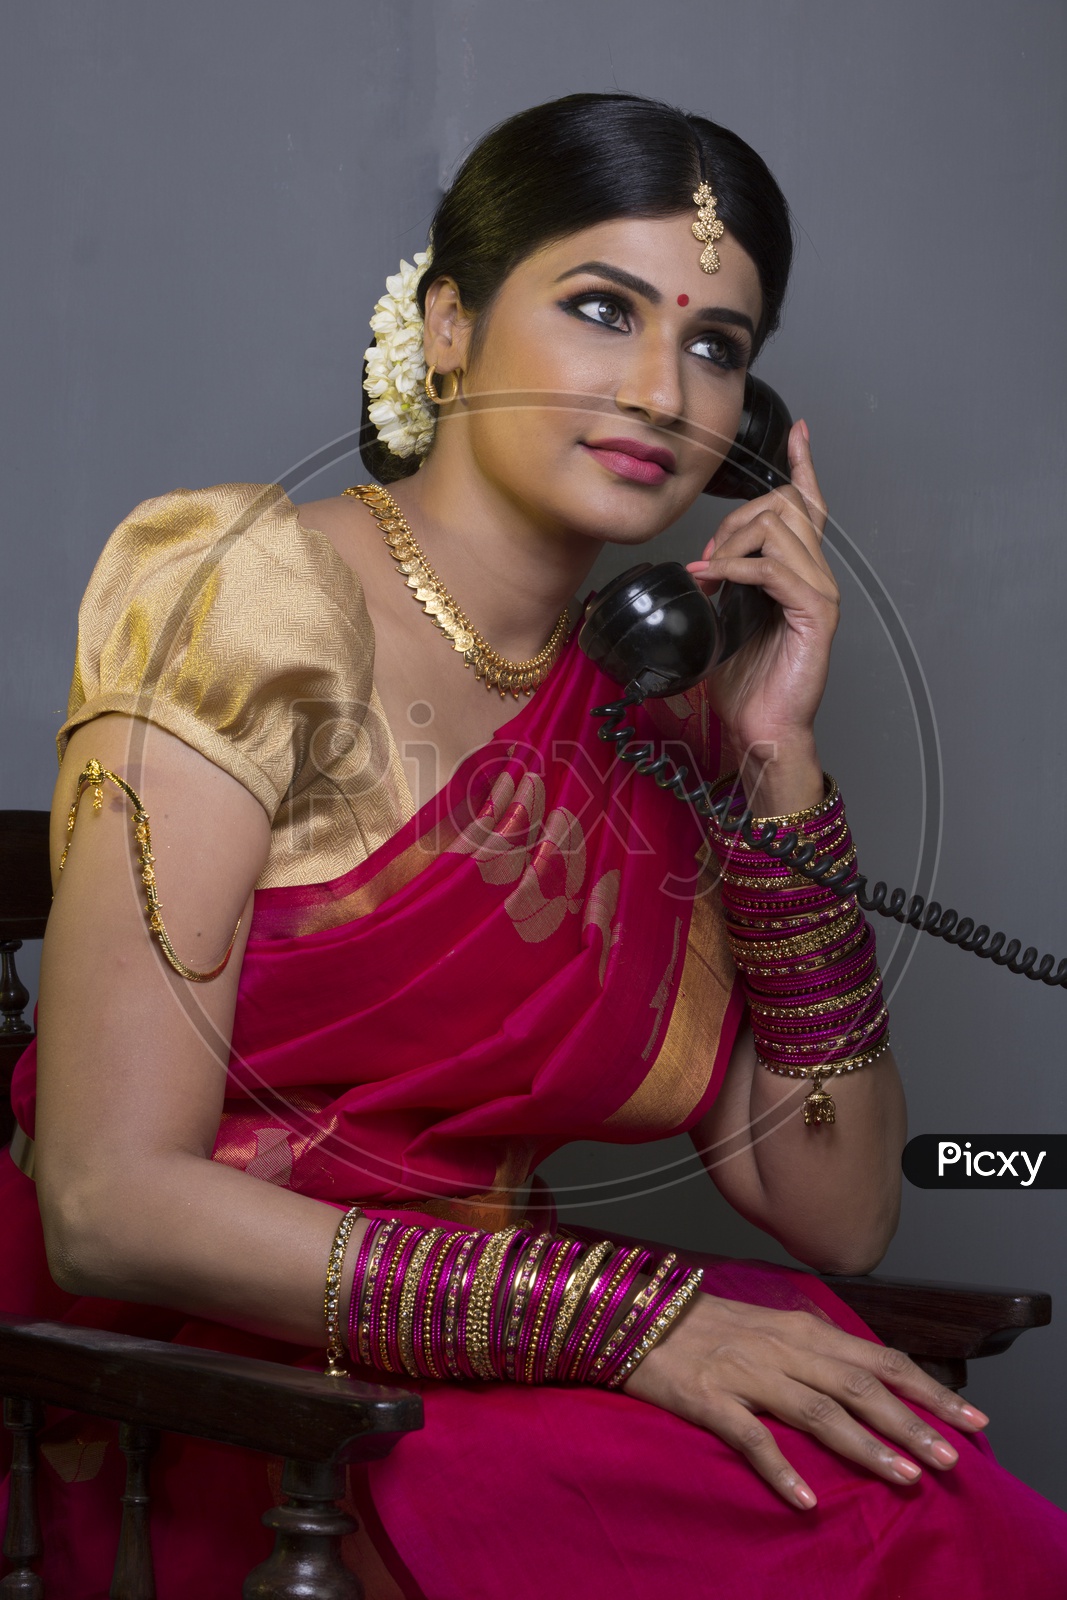 Indian Bride dressed up in red saree talking through a phone portrait in Studio Lighting / Traditionally dressed up girl